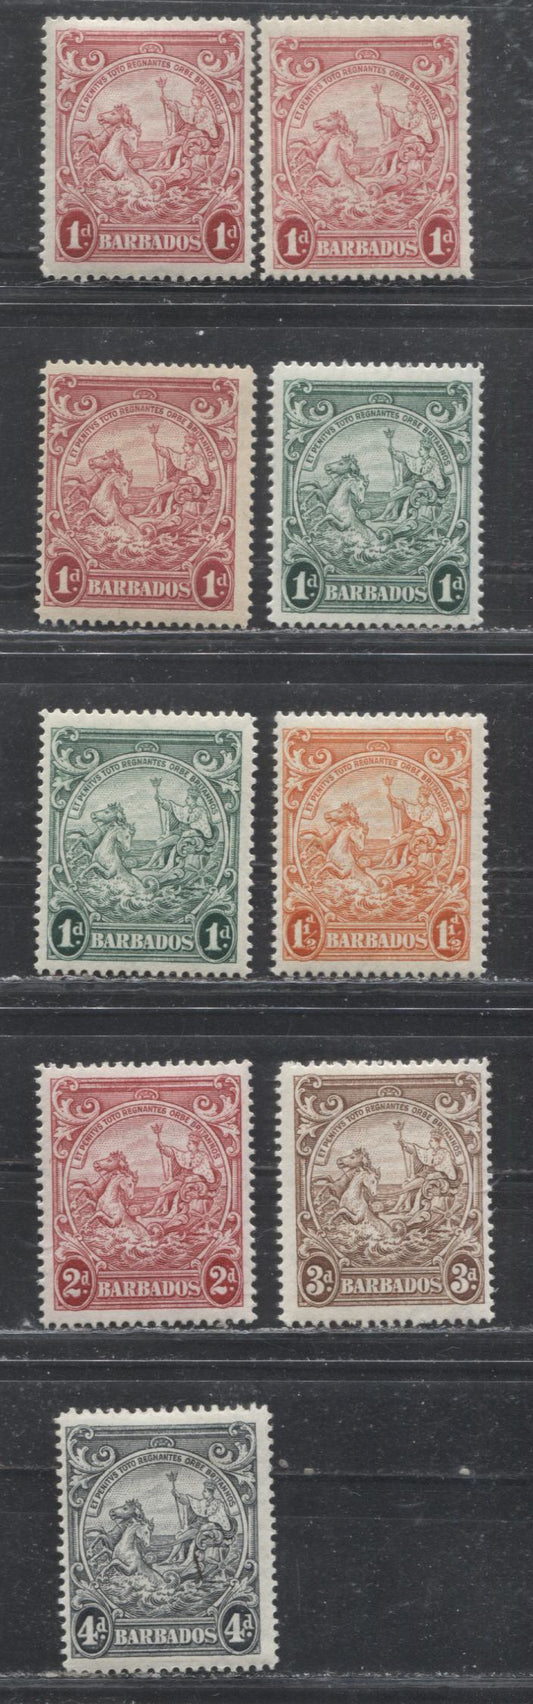 Barbados SG#248b-253d 1938-1947 Badge of the Colony Definitive Issue, a F/VF LH Complete Set of the Perf. 14 Printings, Including Extra Printings of the 1d Carmine Red